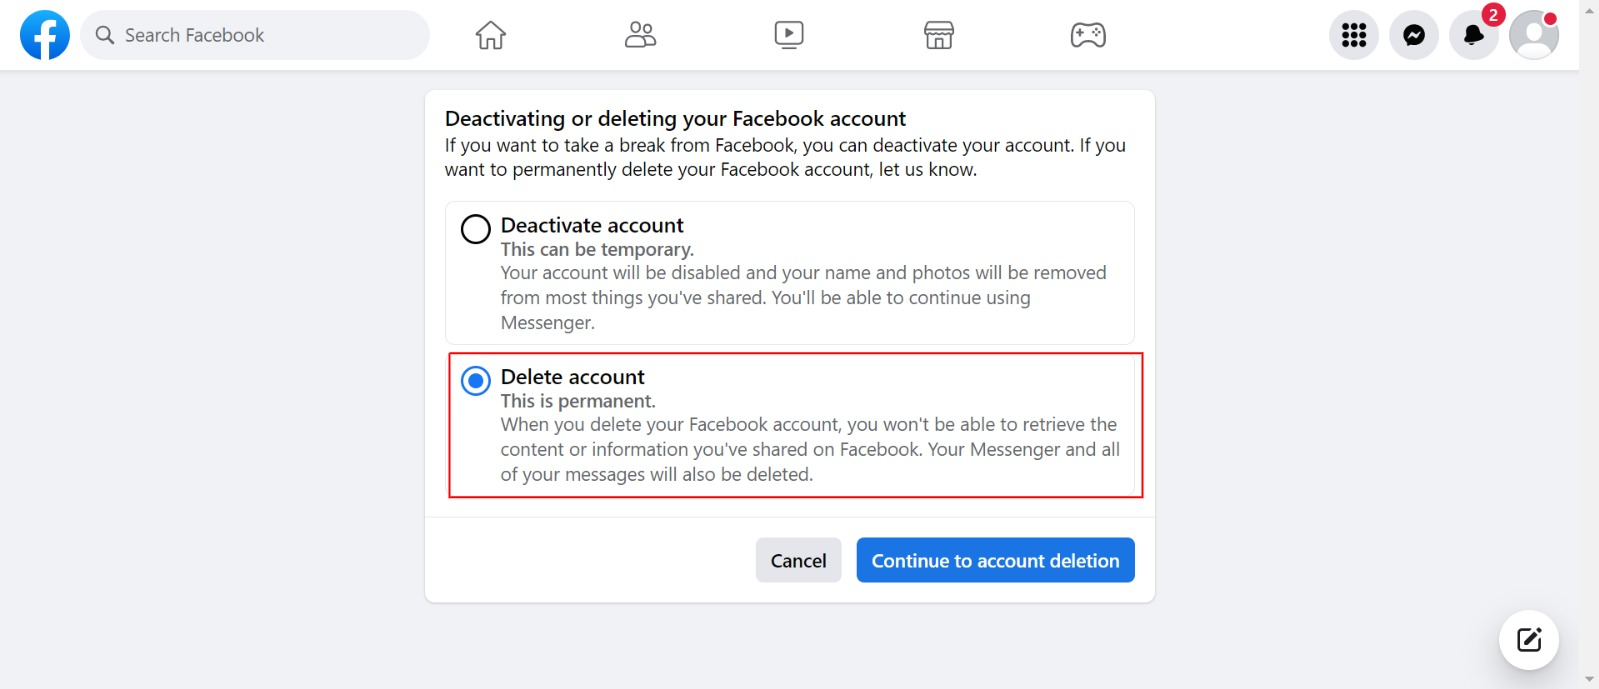 To permanently delete your account, follow these steps: